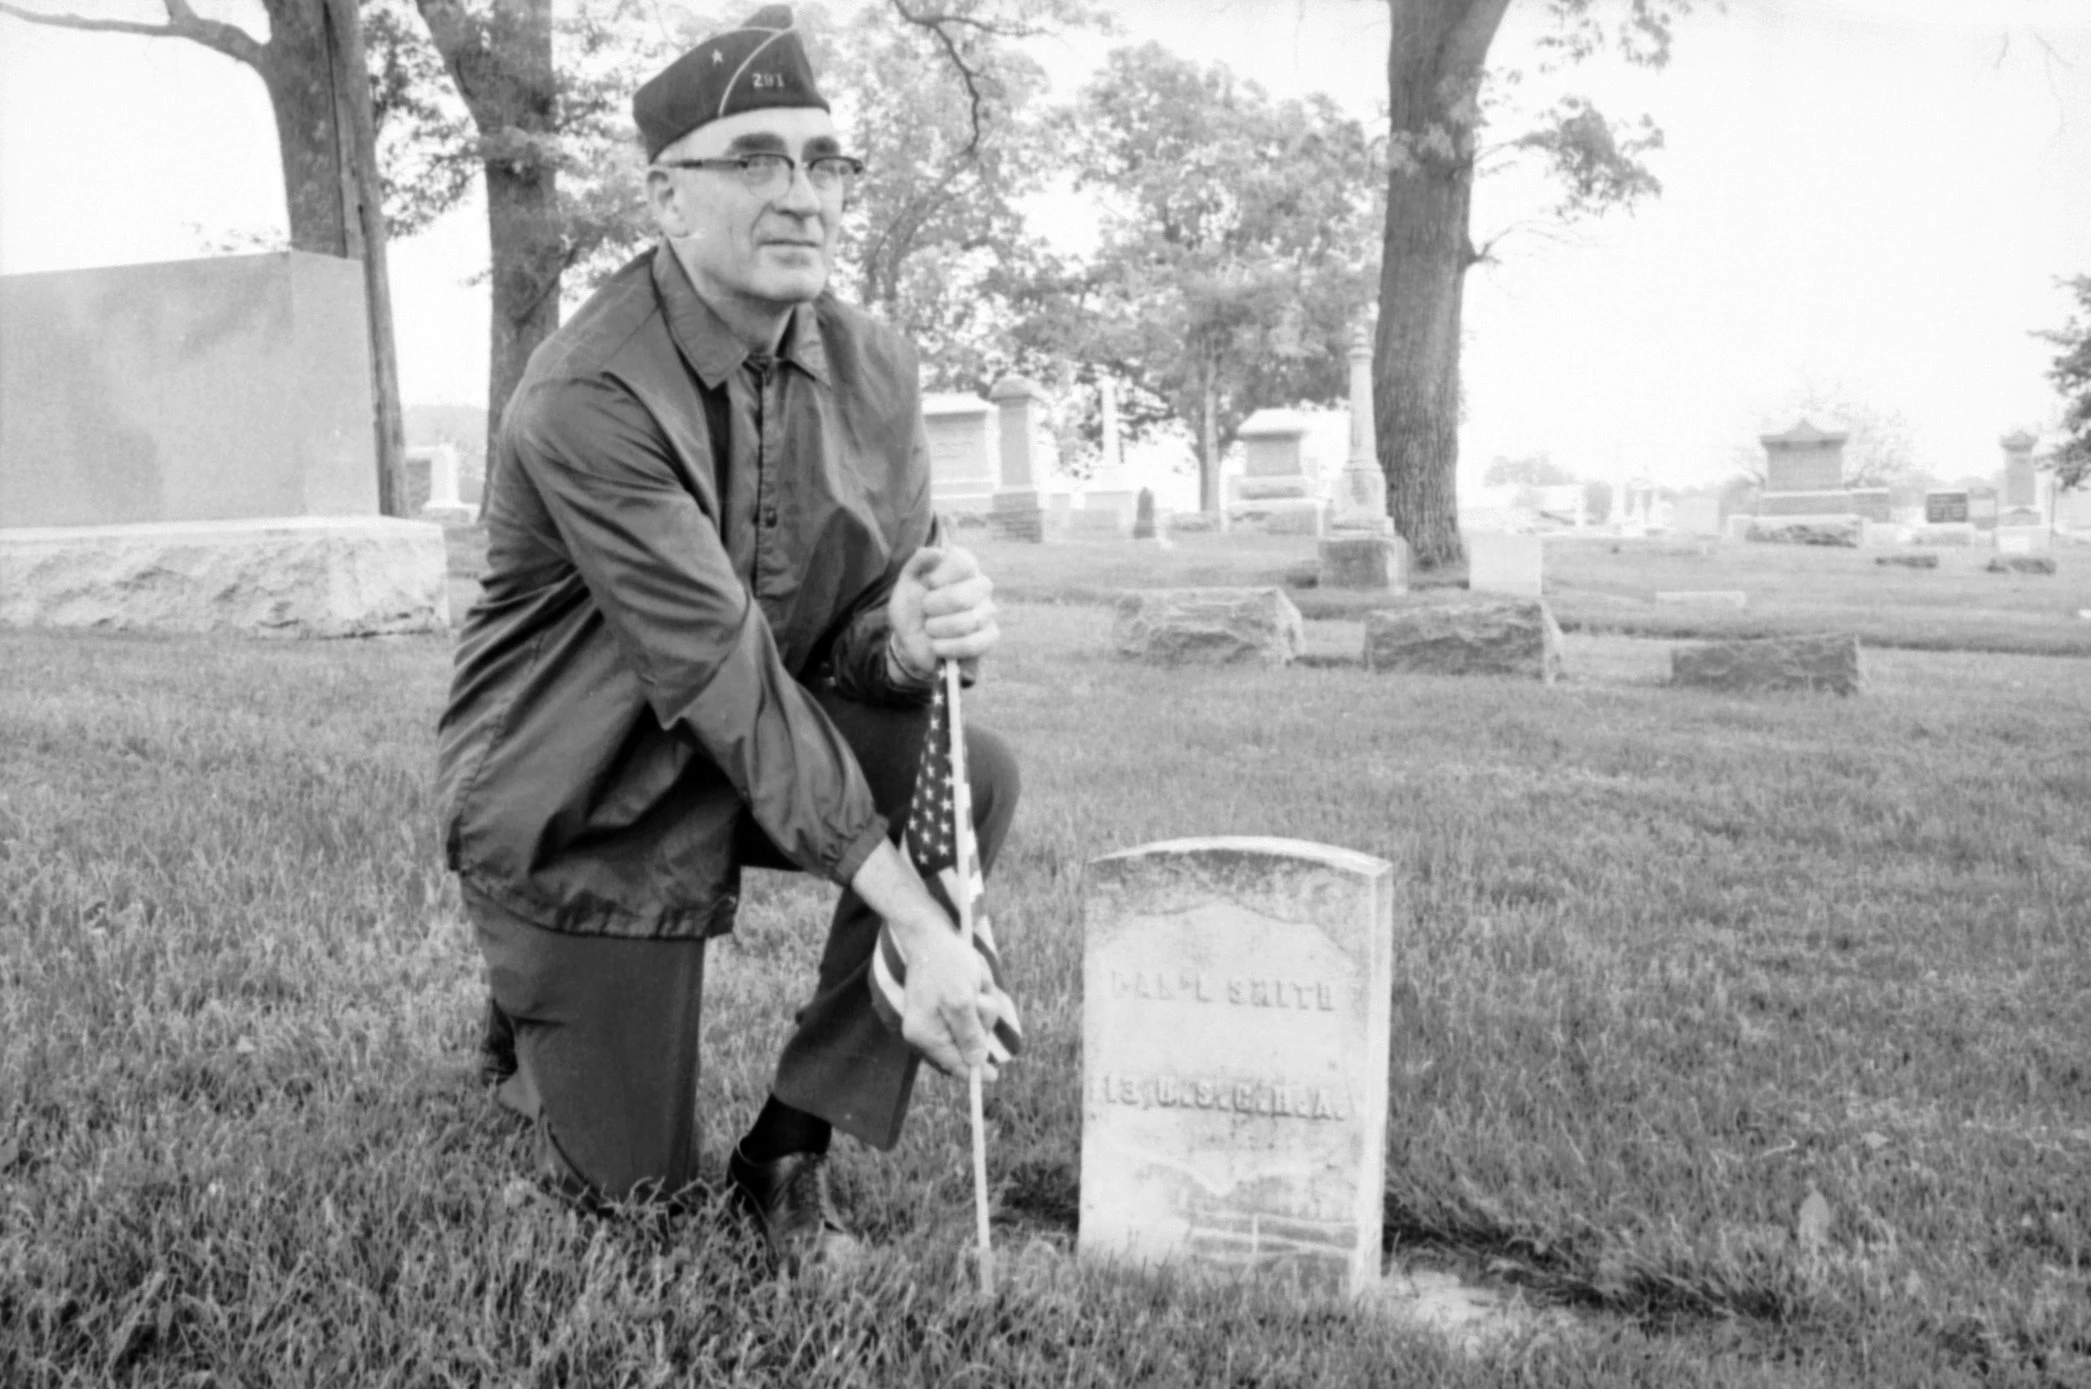 A man kneels, inserting an American flag next to a grave stone in a cemetery.